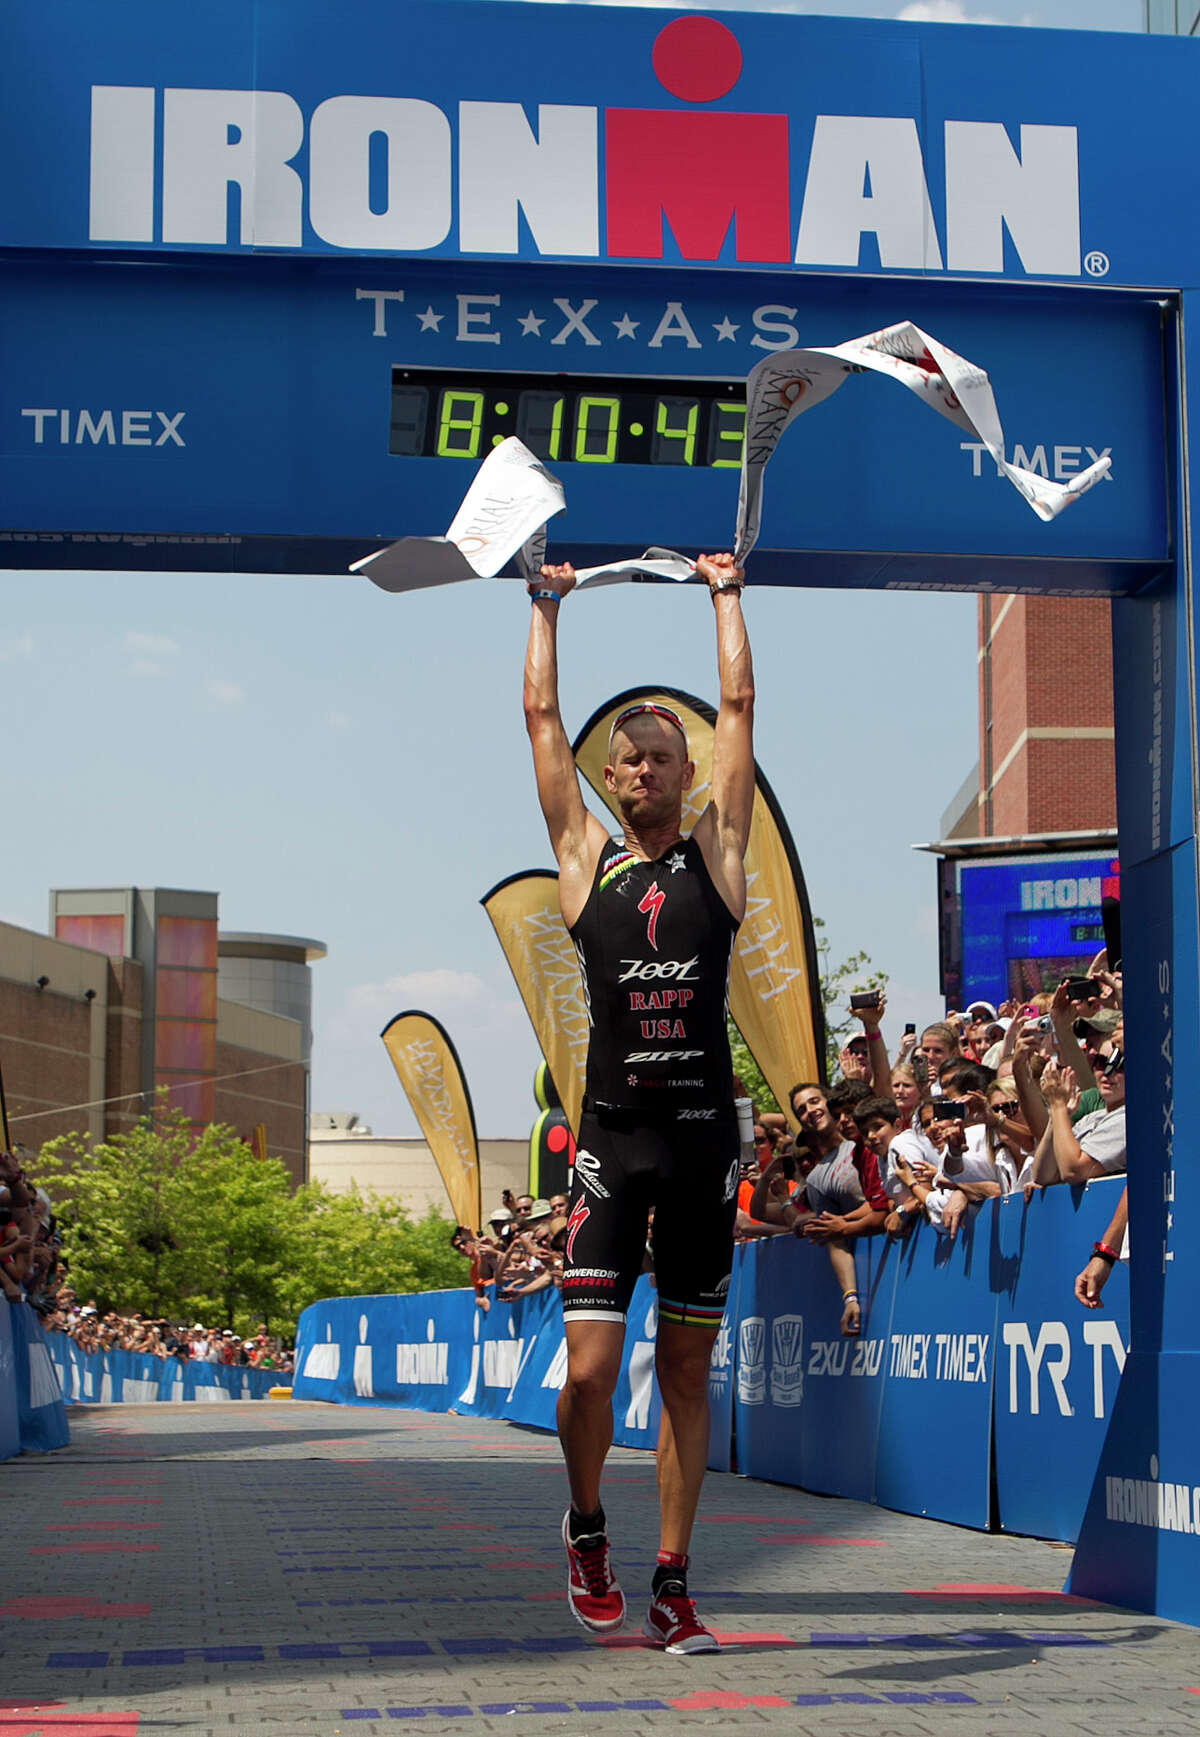 Jordan Rapp celebrates at the finish line after winning the Memorial Hermann Ironman Texas triathlon Saturday, May 19, 2012, in The Woodlands.